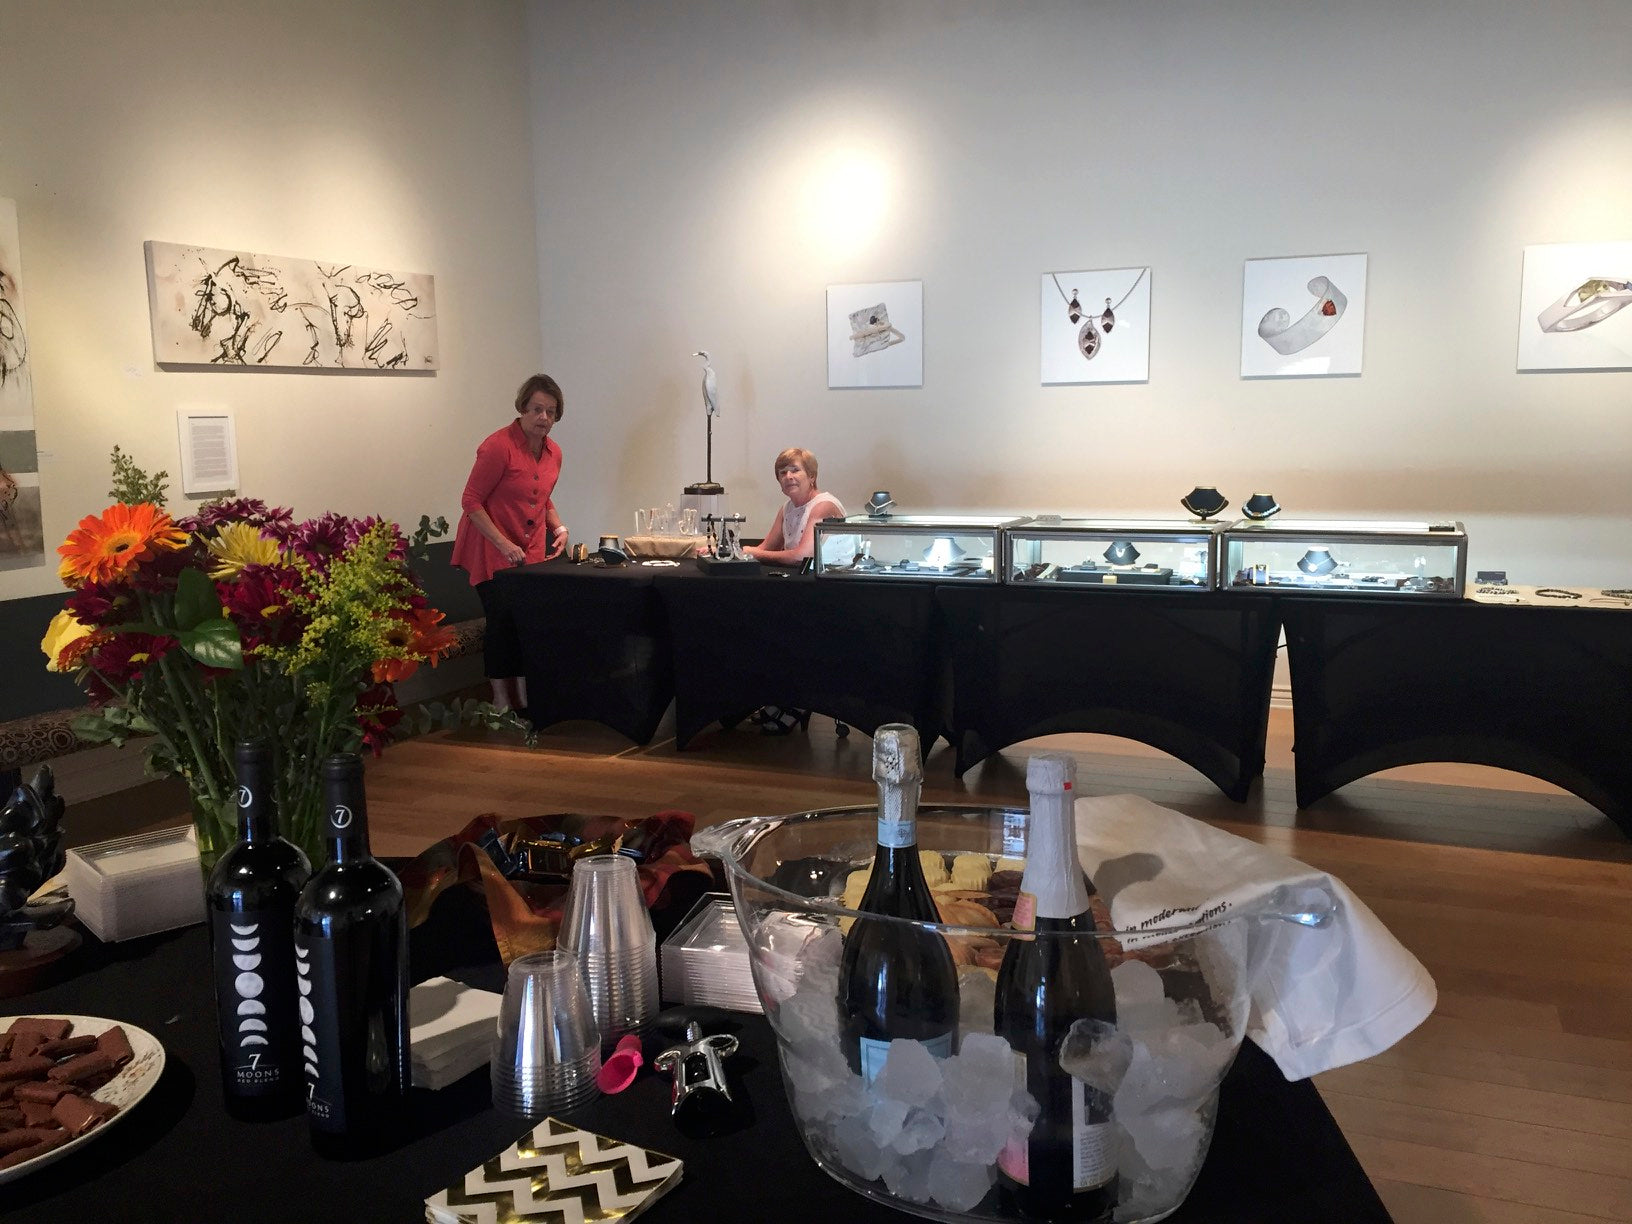 The Art Bar - Featured Event for December in AZFoothills Weekly Holiday News